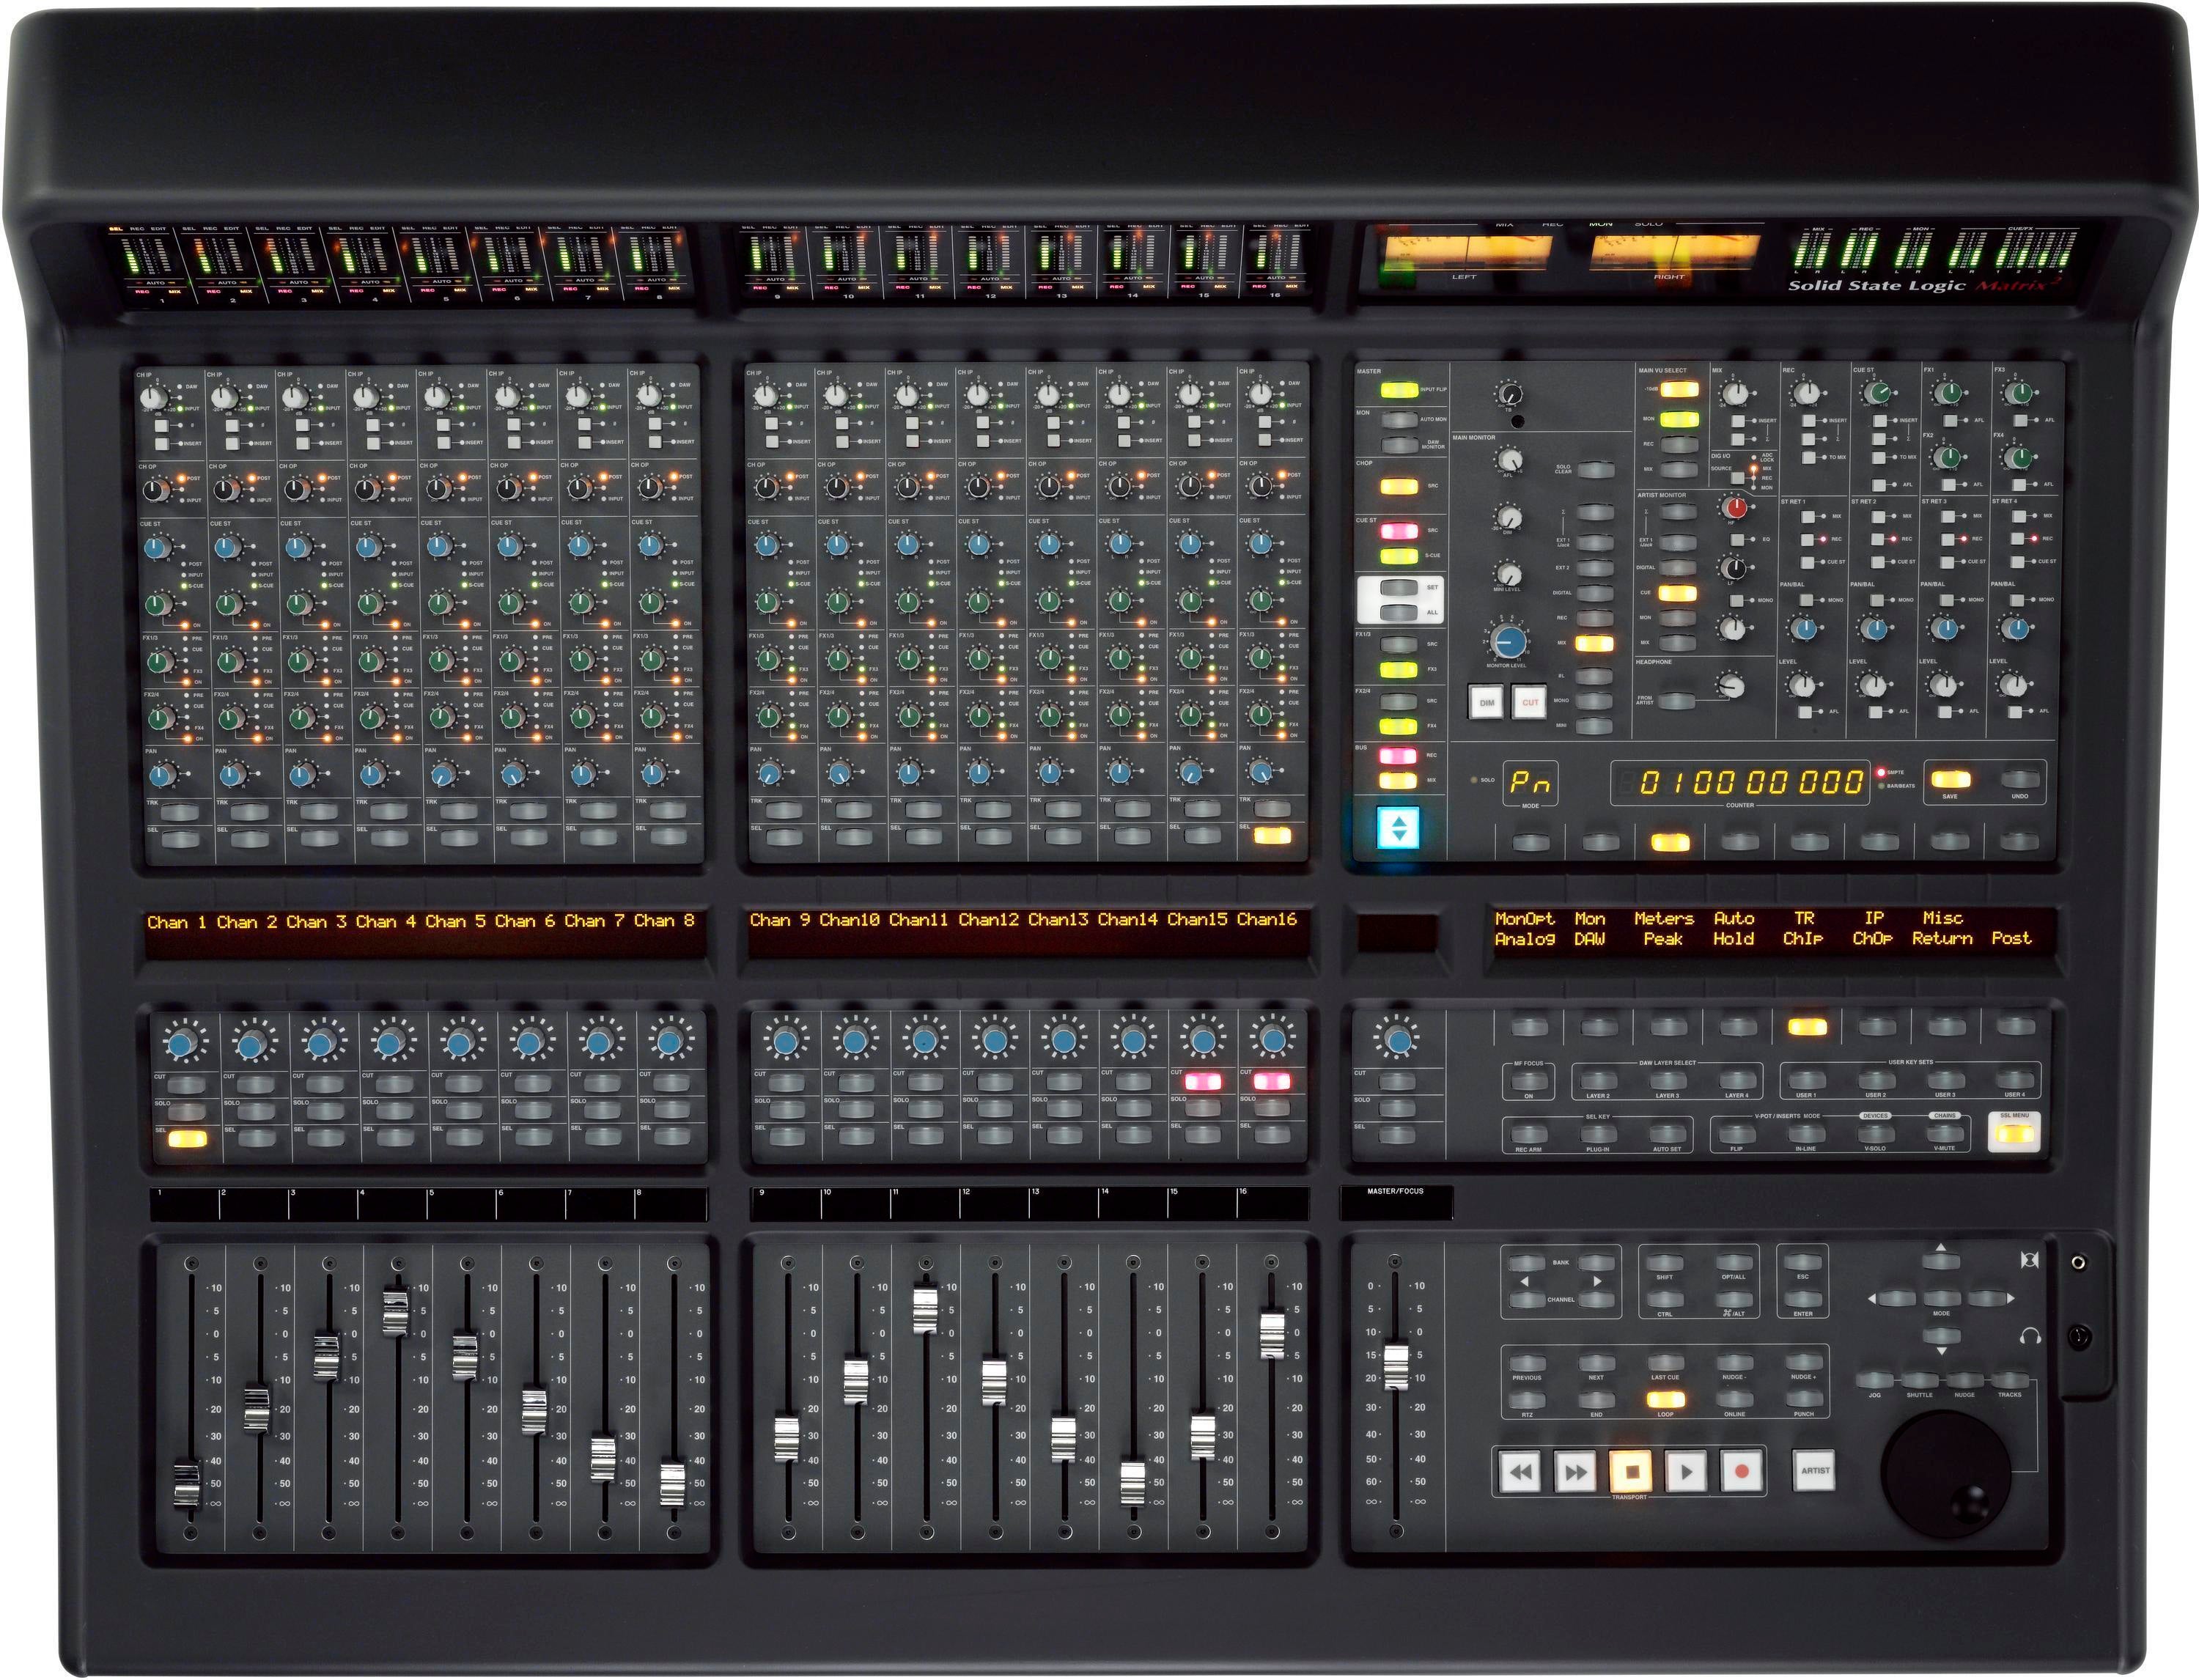 Solid State Logic Matrix2 Delta Mixing Console and Control Surface